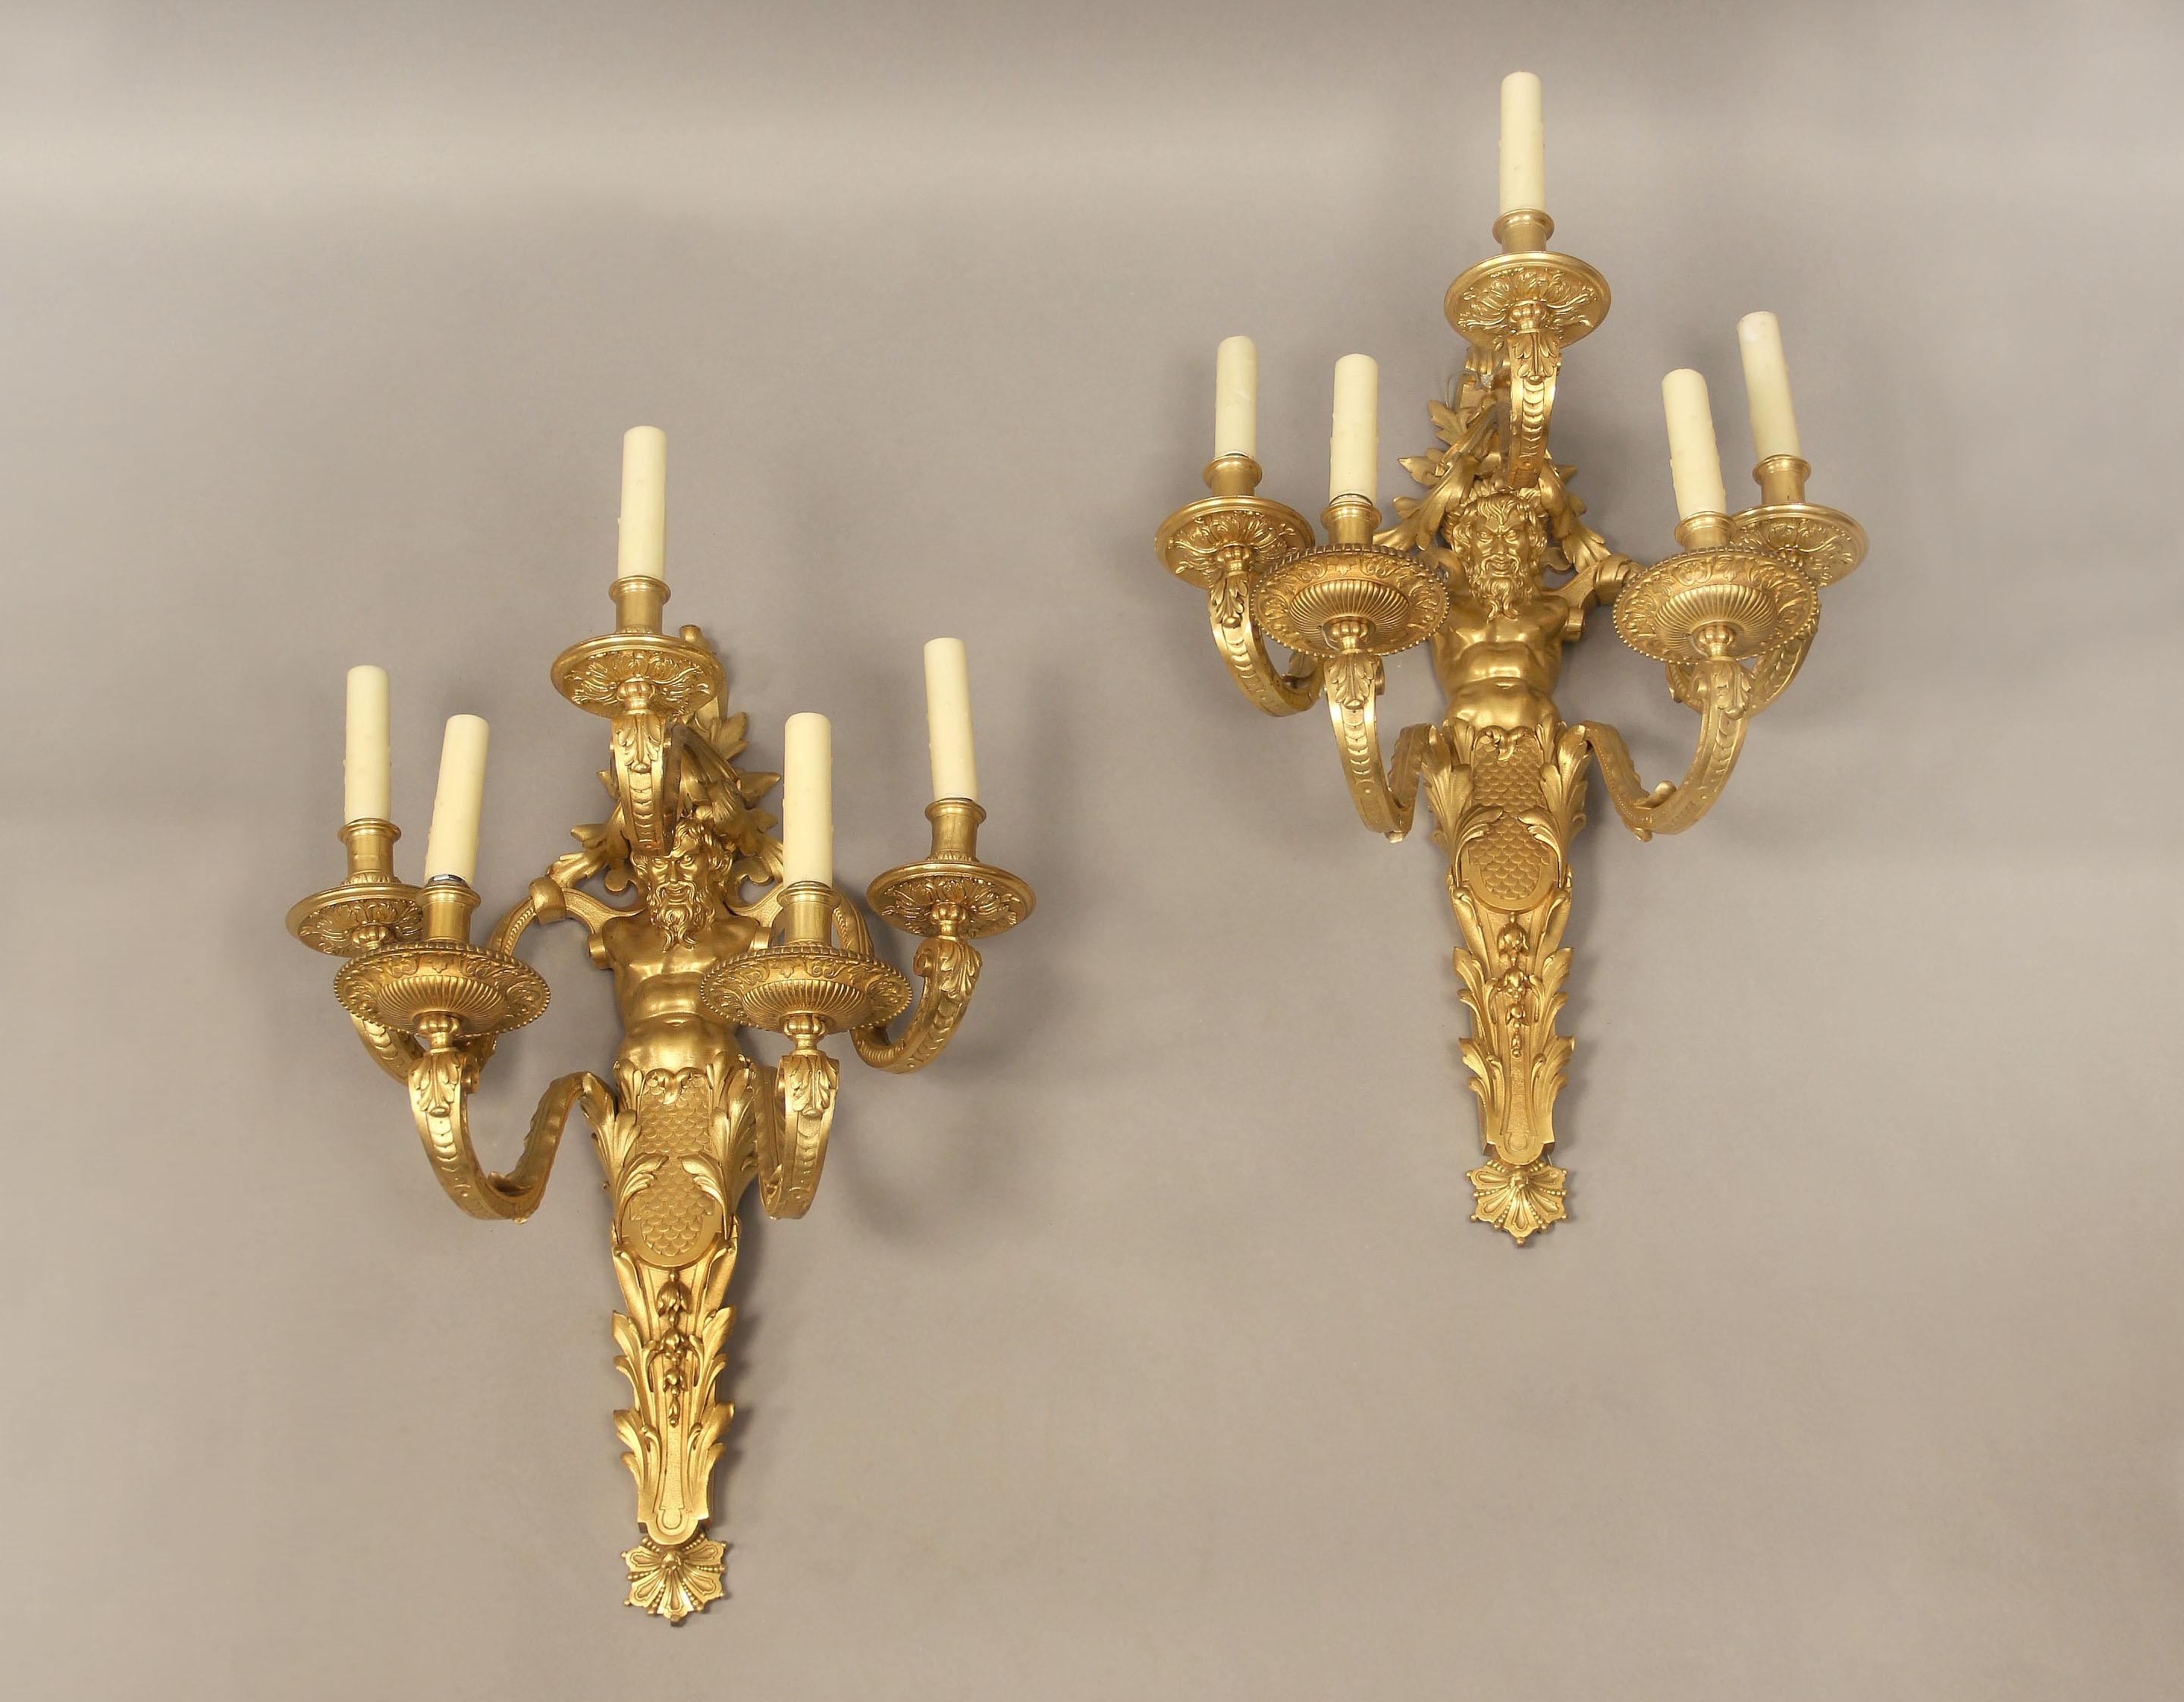 A great pair of late 19th century gilt bronze five light sconces

By Henry Dasson

Each centered by a bearded male mask, downward scale cast candle arms.

Signed Henry Dasson 1878 to the lower side of each sconce

Henry Dasson was considered